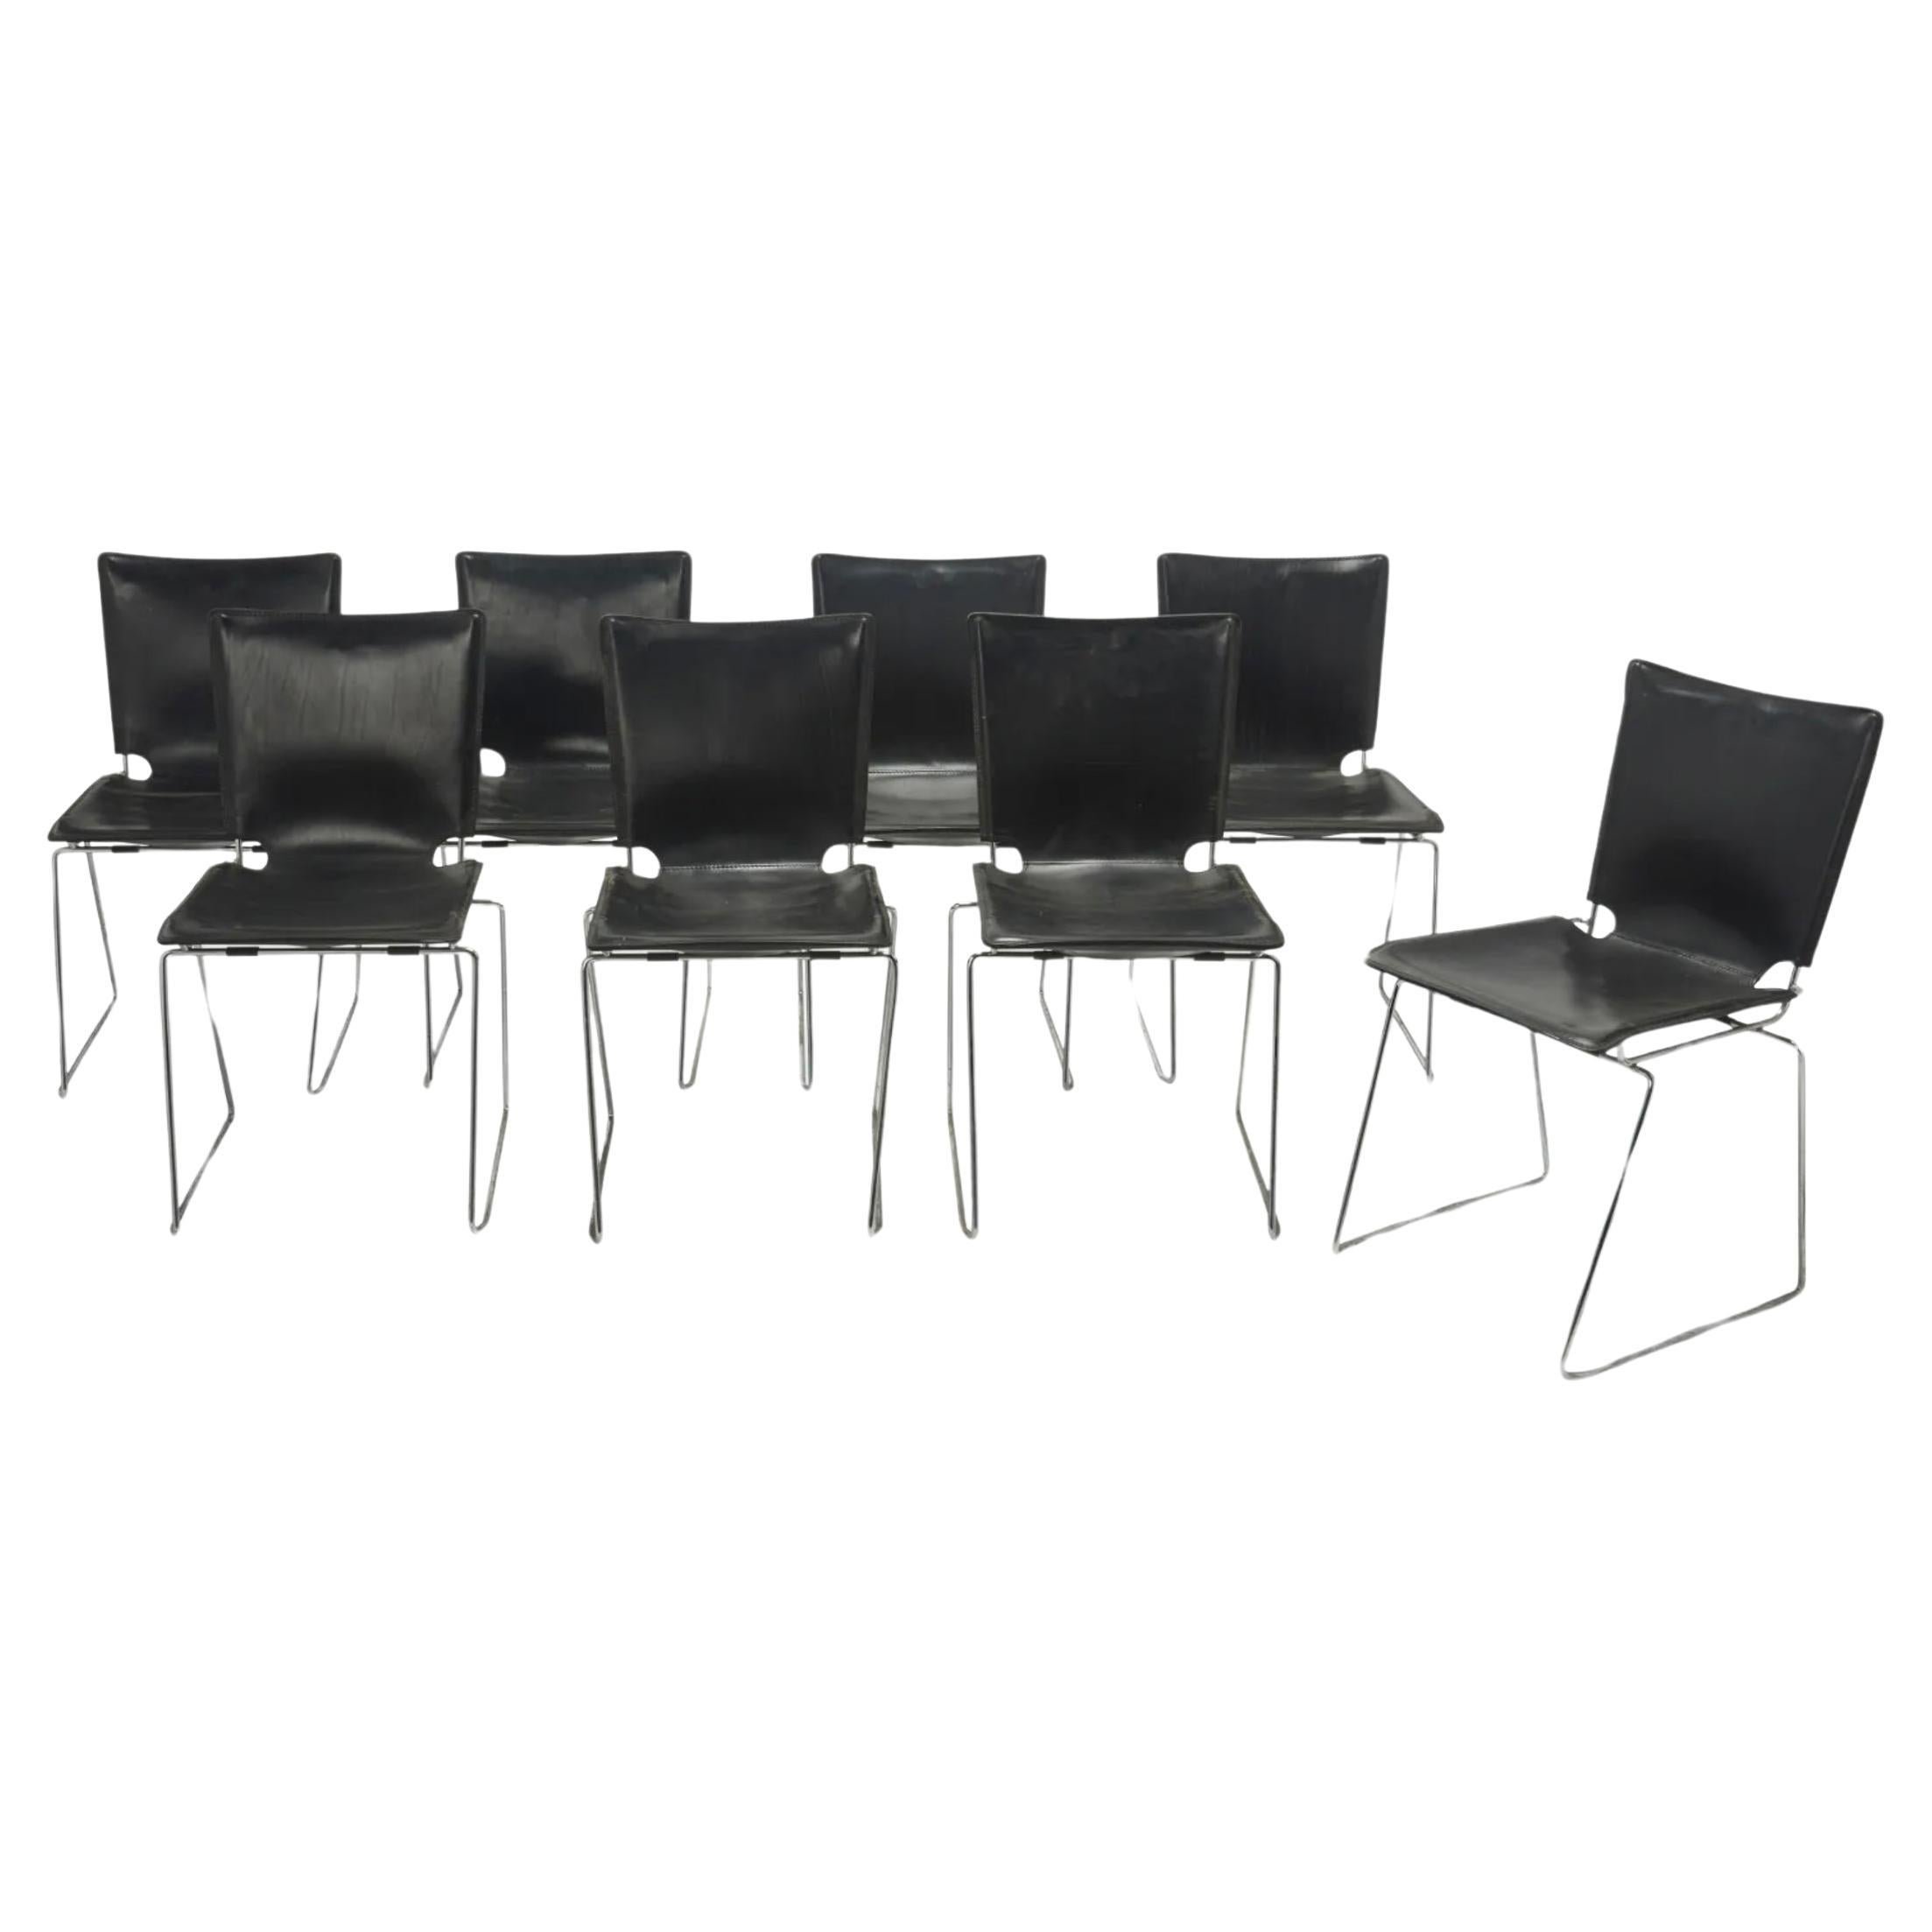 Up to 8 Midcentury Pelle Stacking Chairs by ICF For Sale